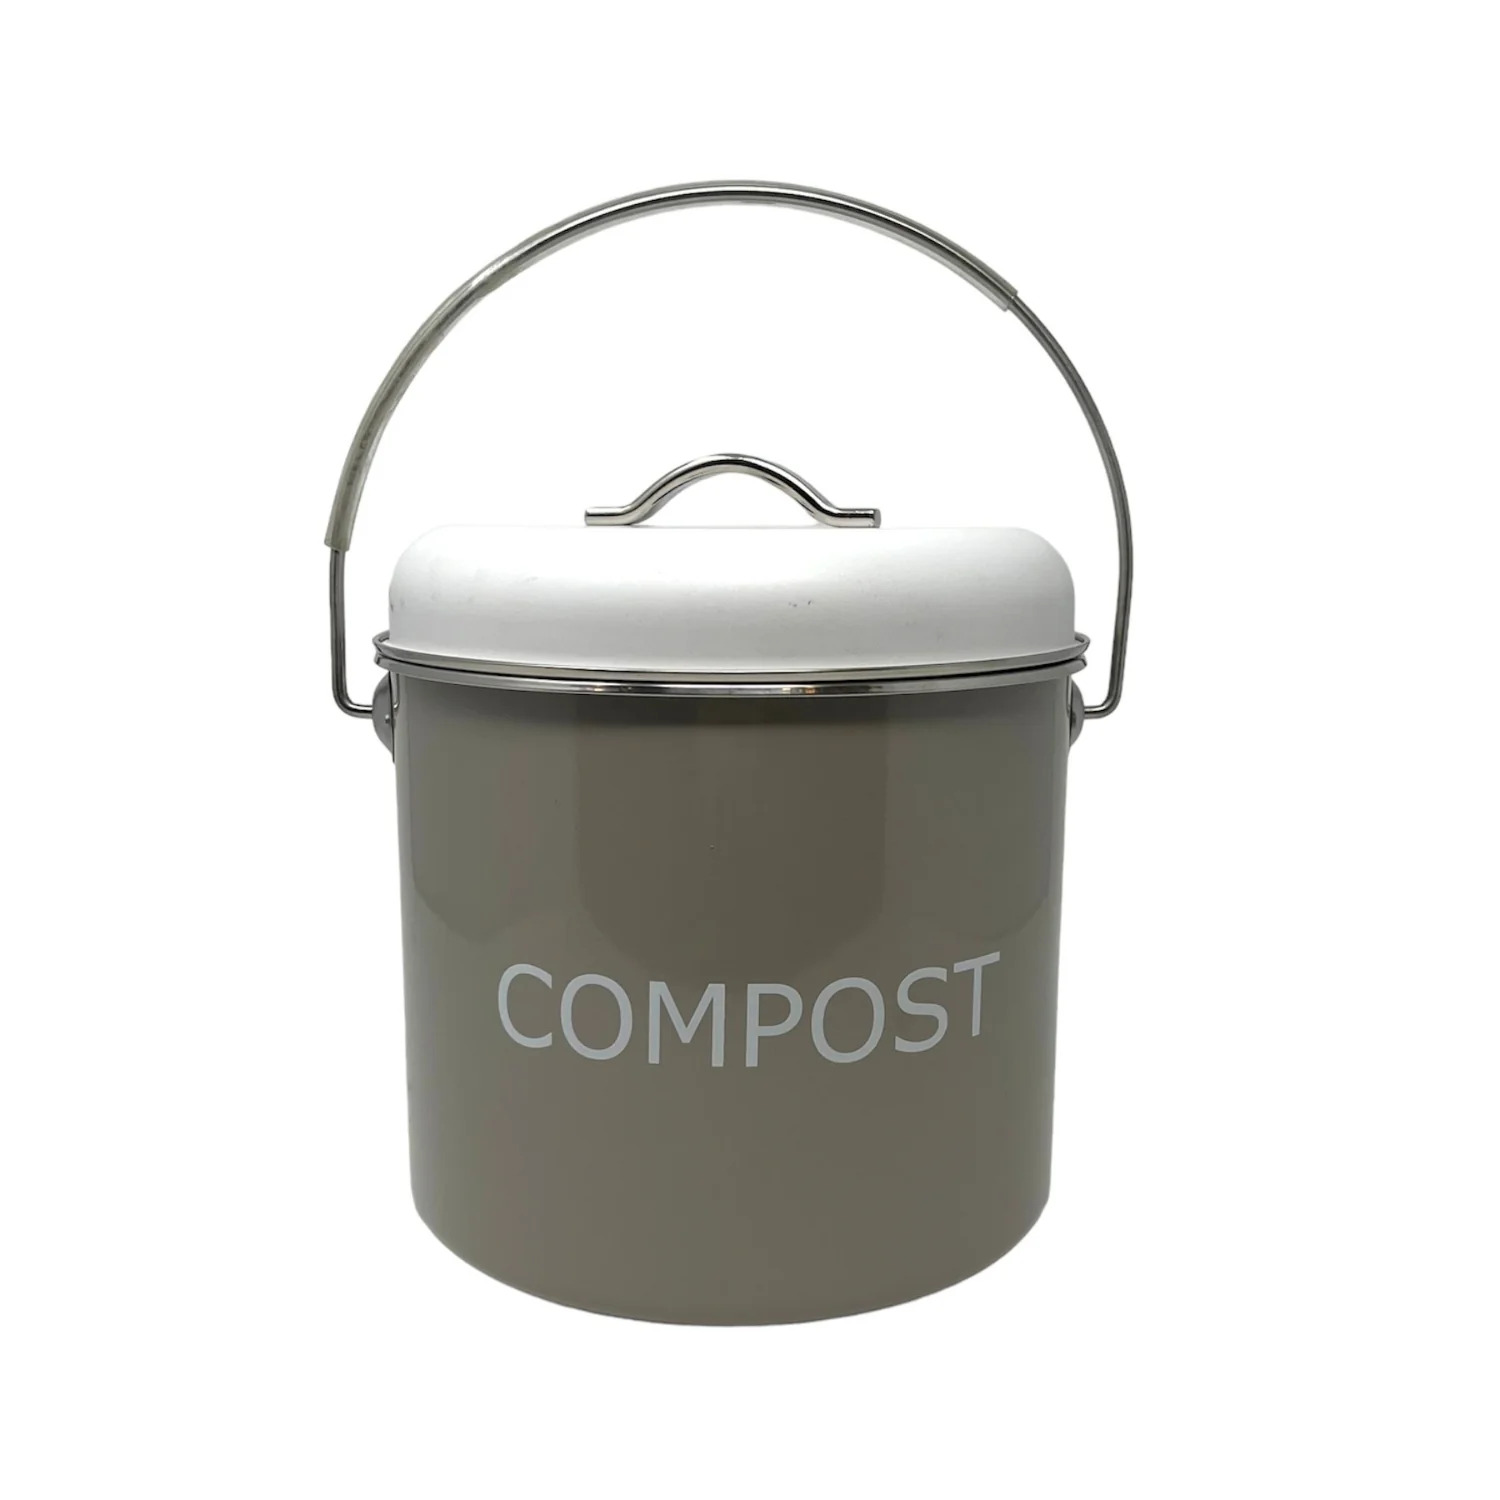 Discount Trends Eco-Friendly Composter